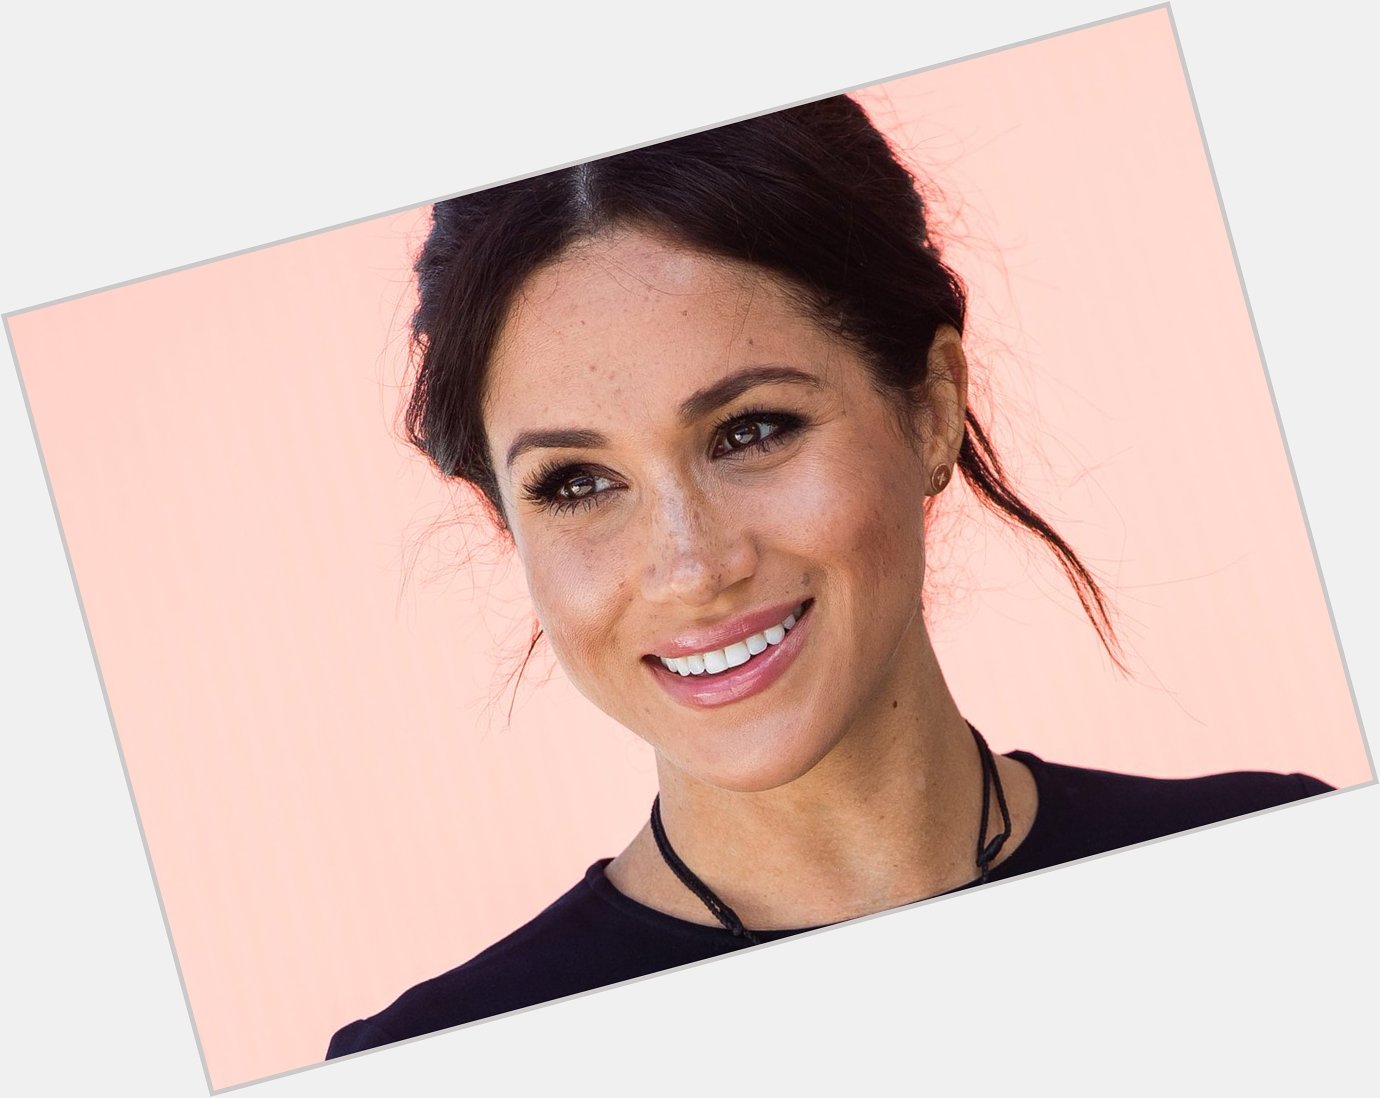 Happy birthday Meghan Markle, the Duchess of Sussex! Photo: Samir Hussein/Getty Images 